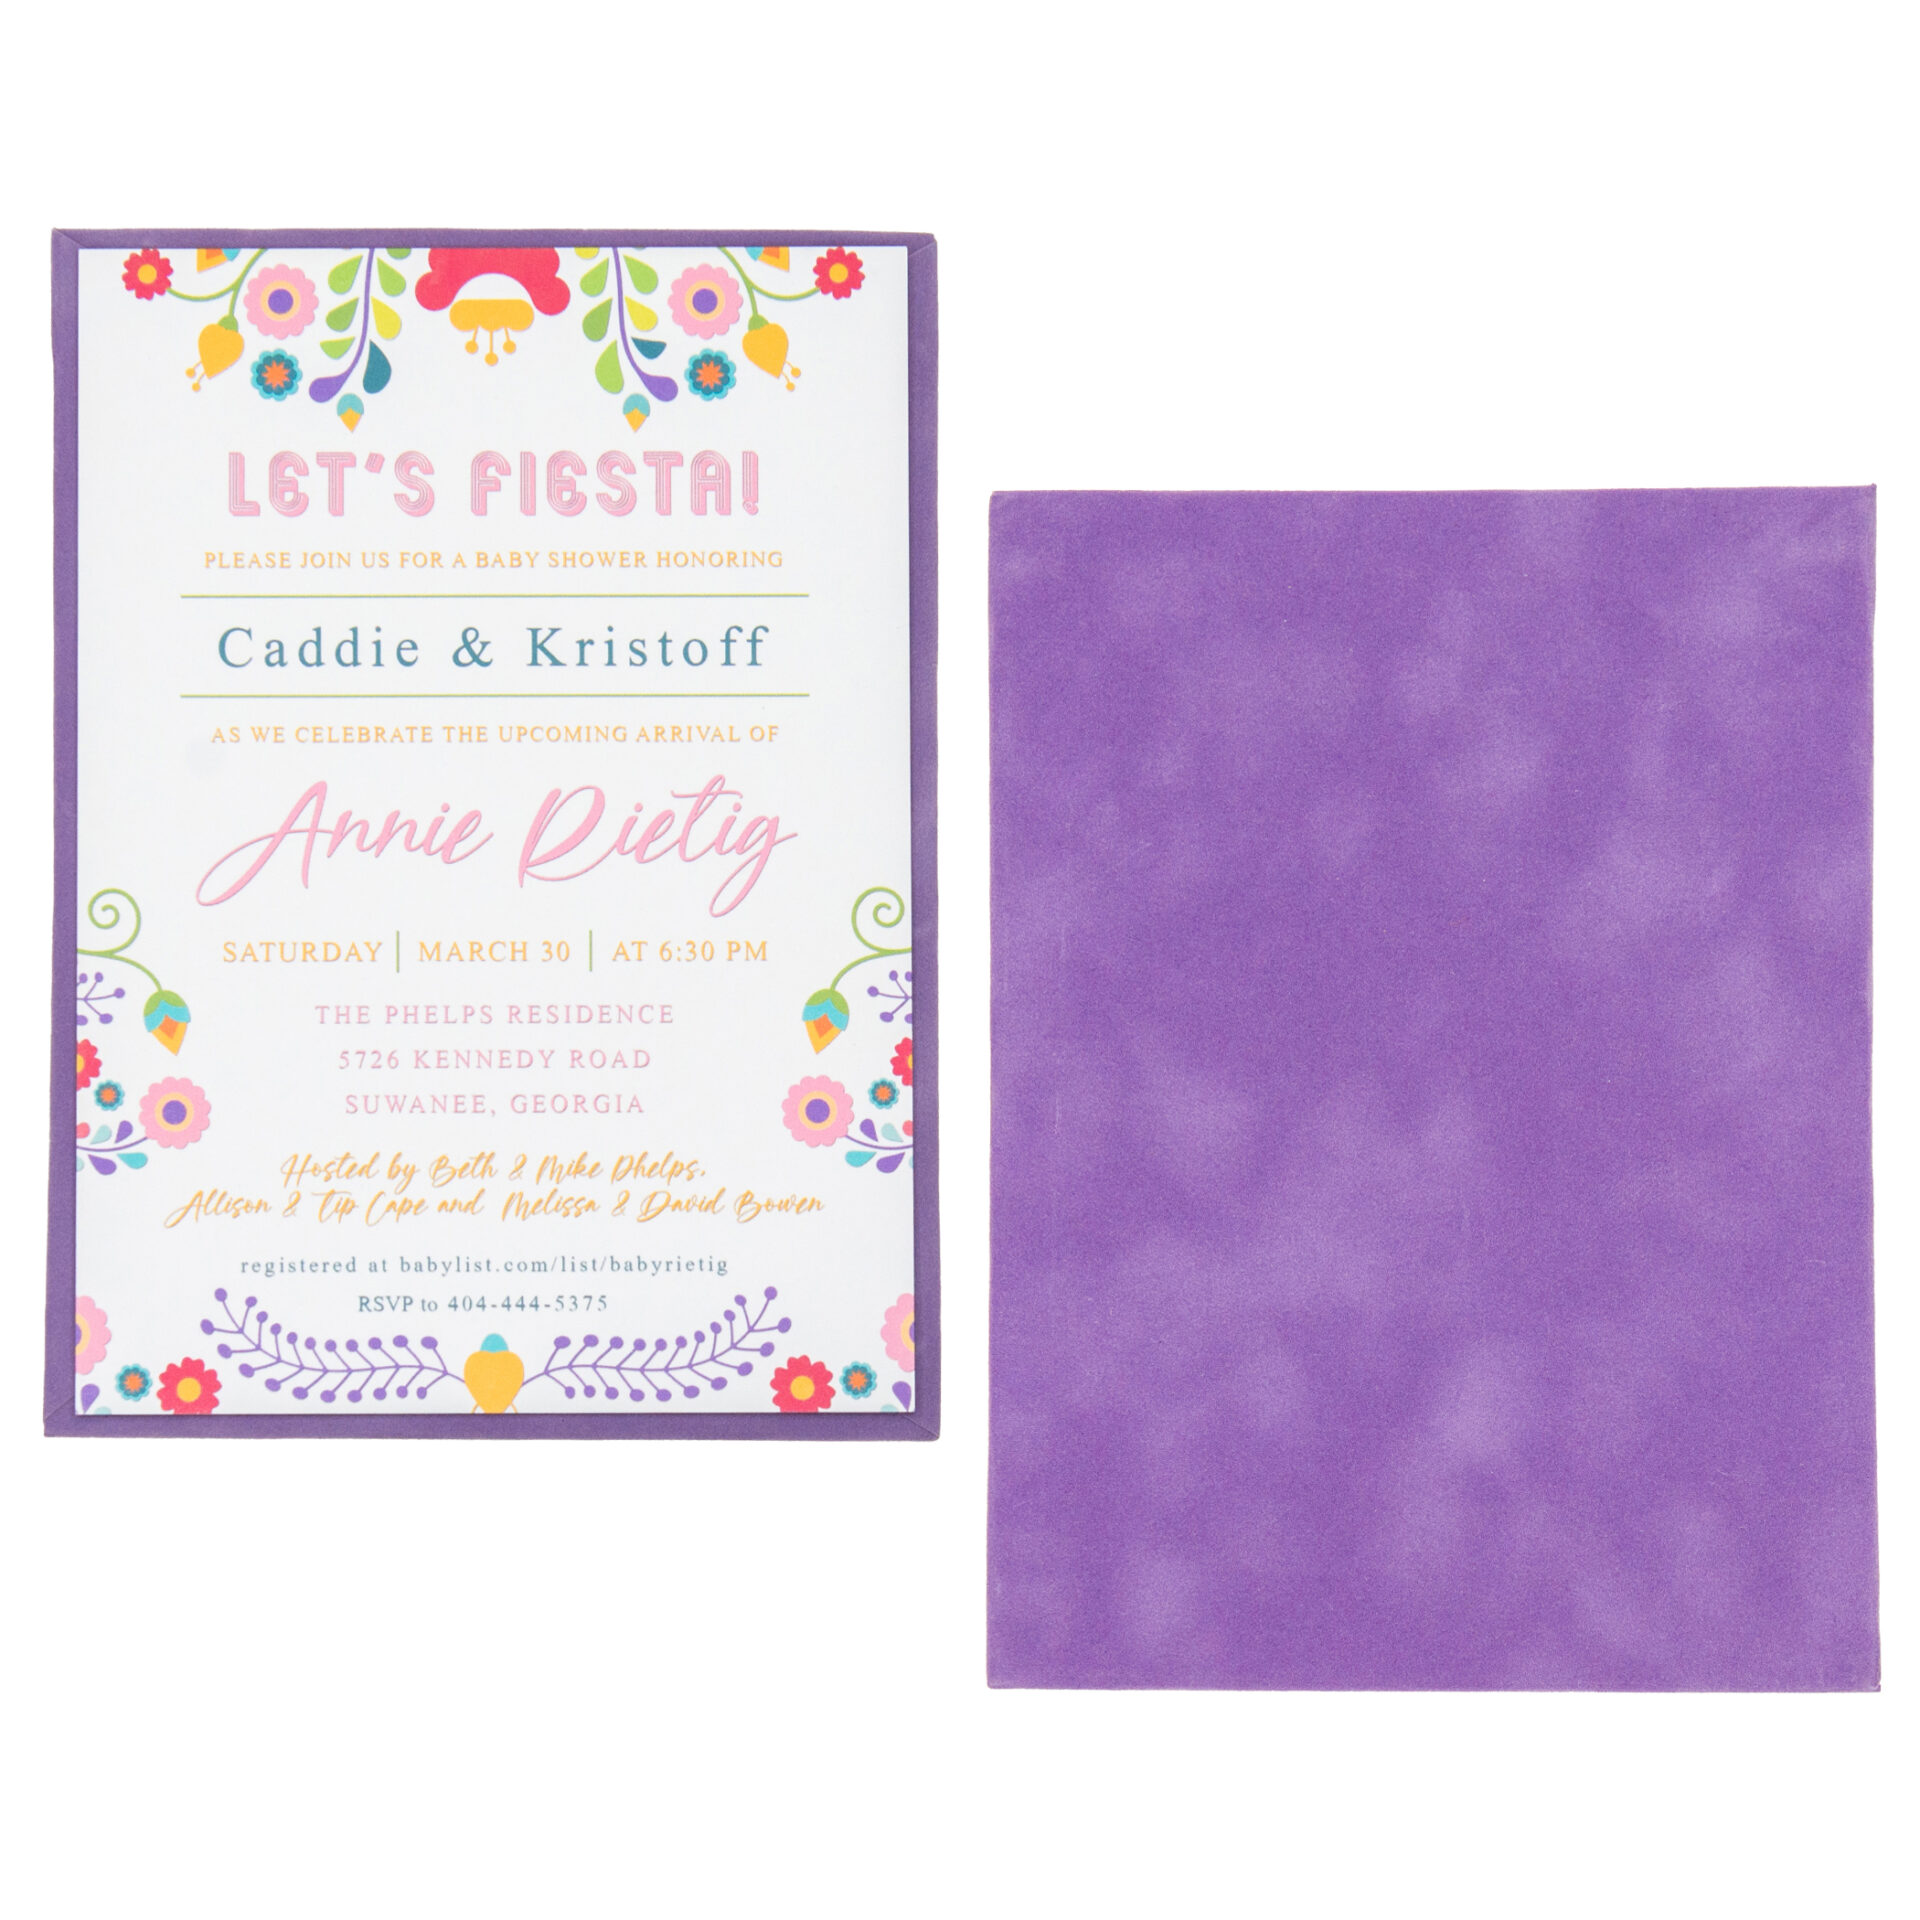 Suede Invitation Panel (Panel Only) - Mauve